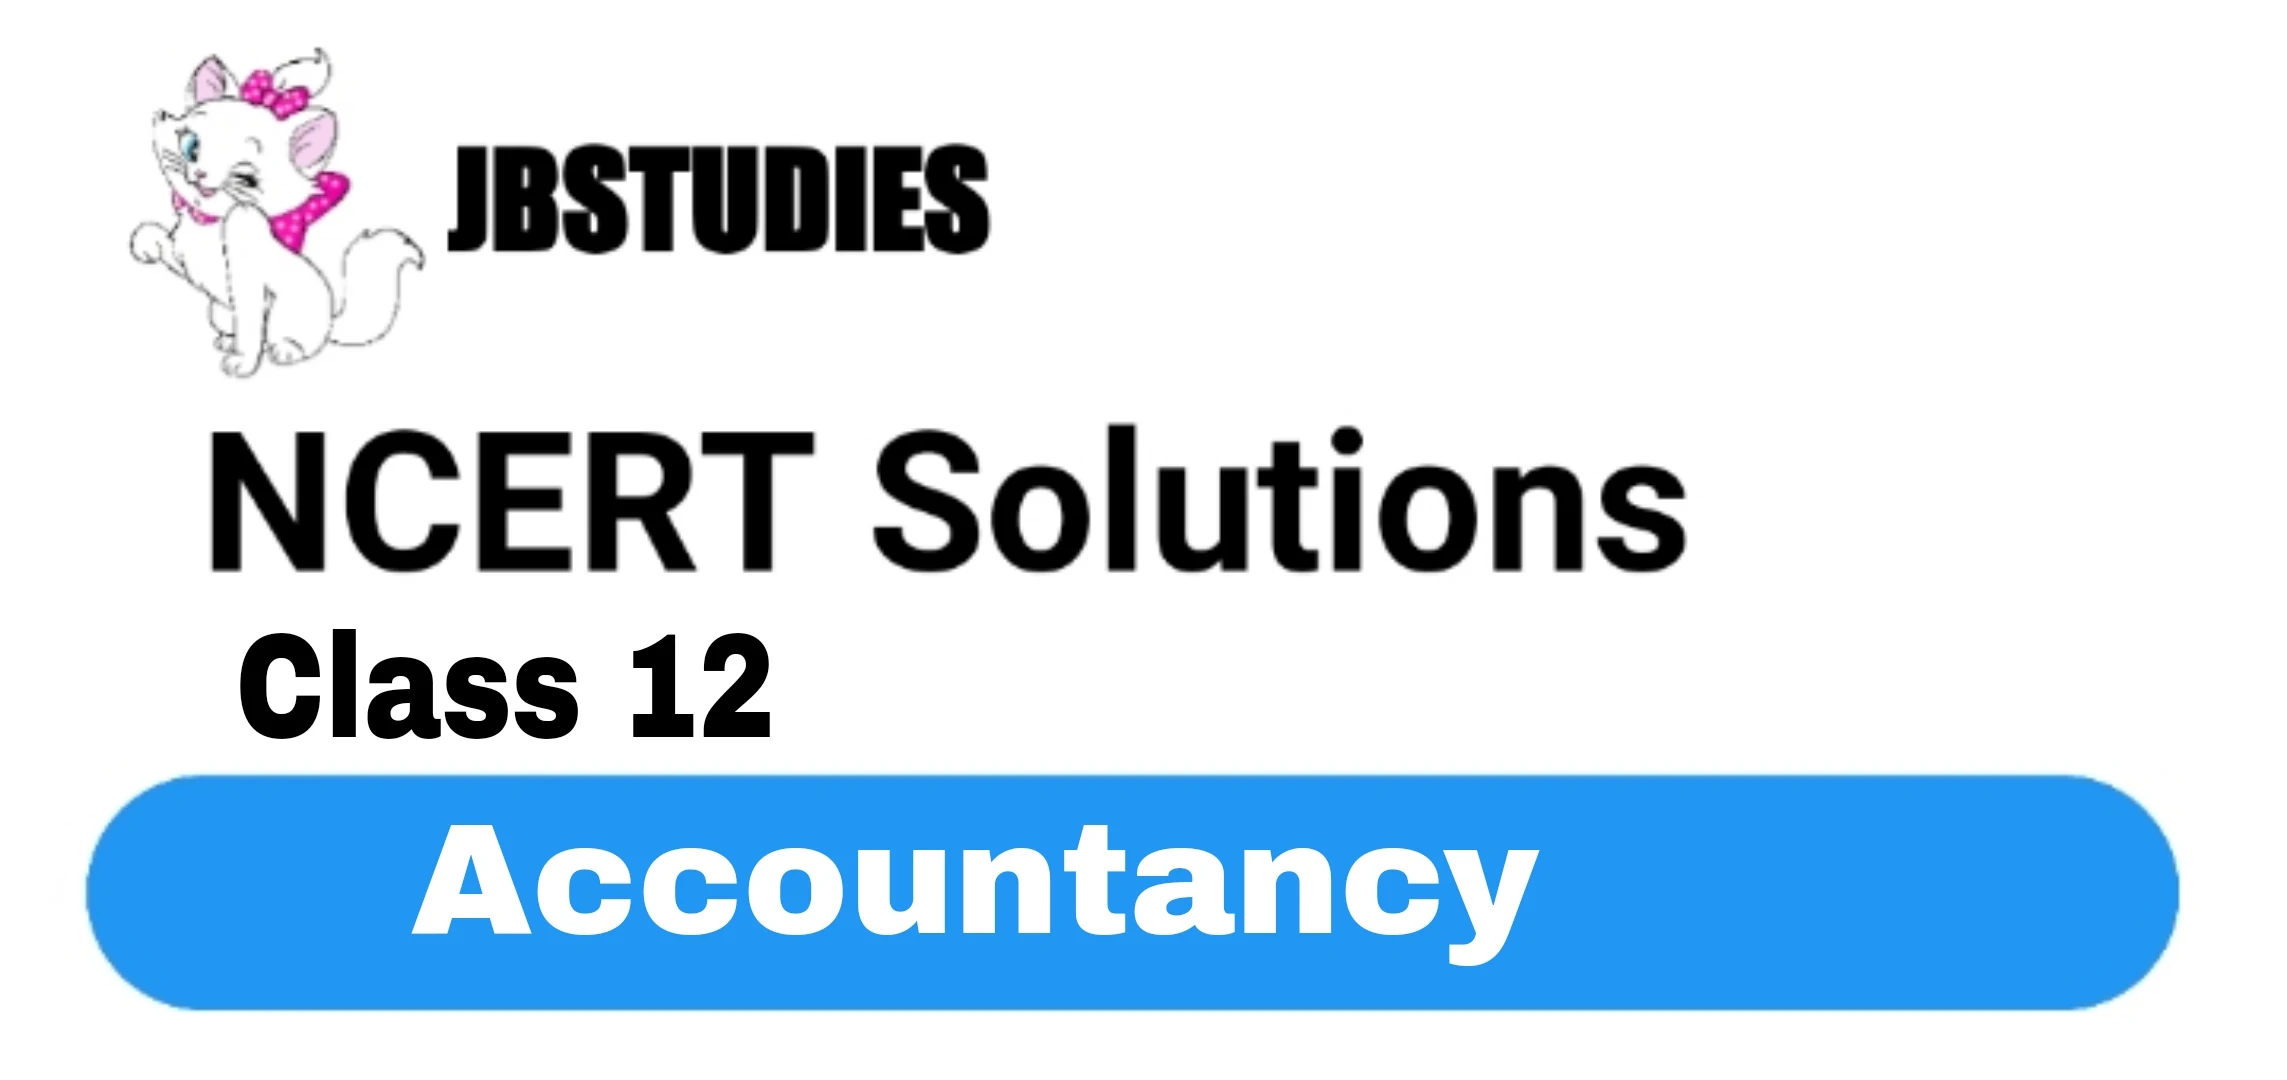 NCERT Solutions for Class 12 Accountancy